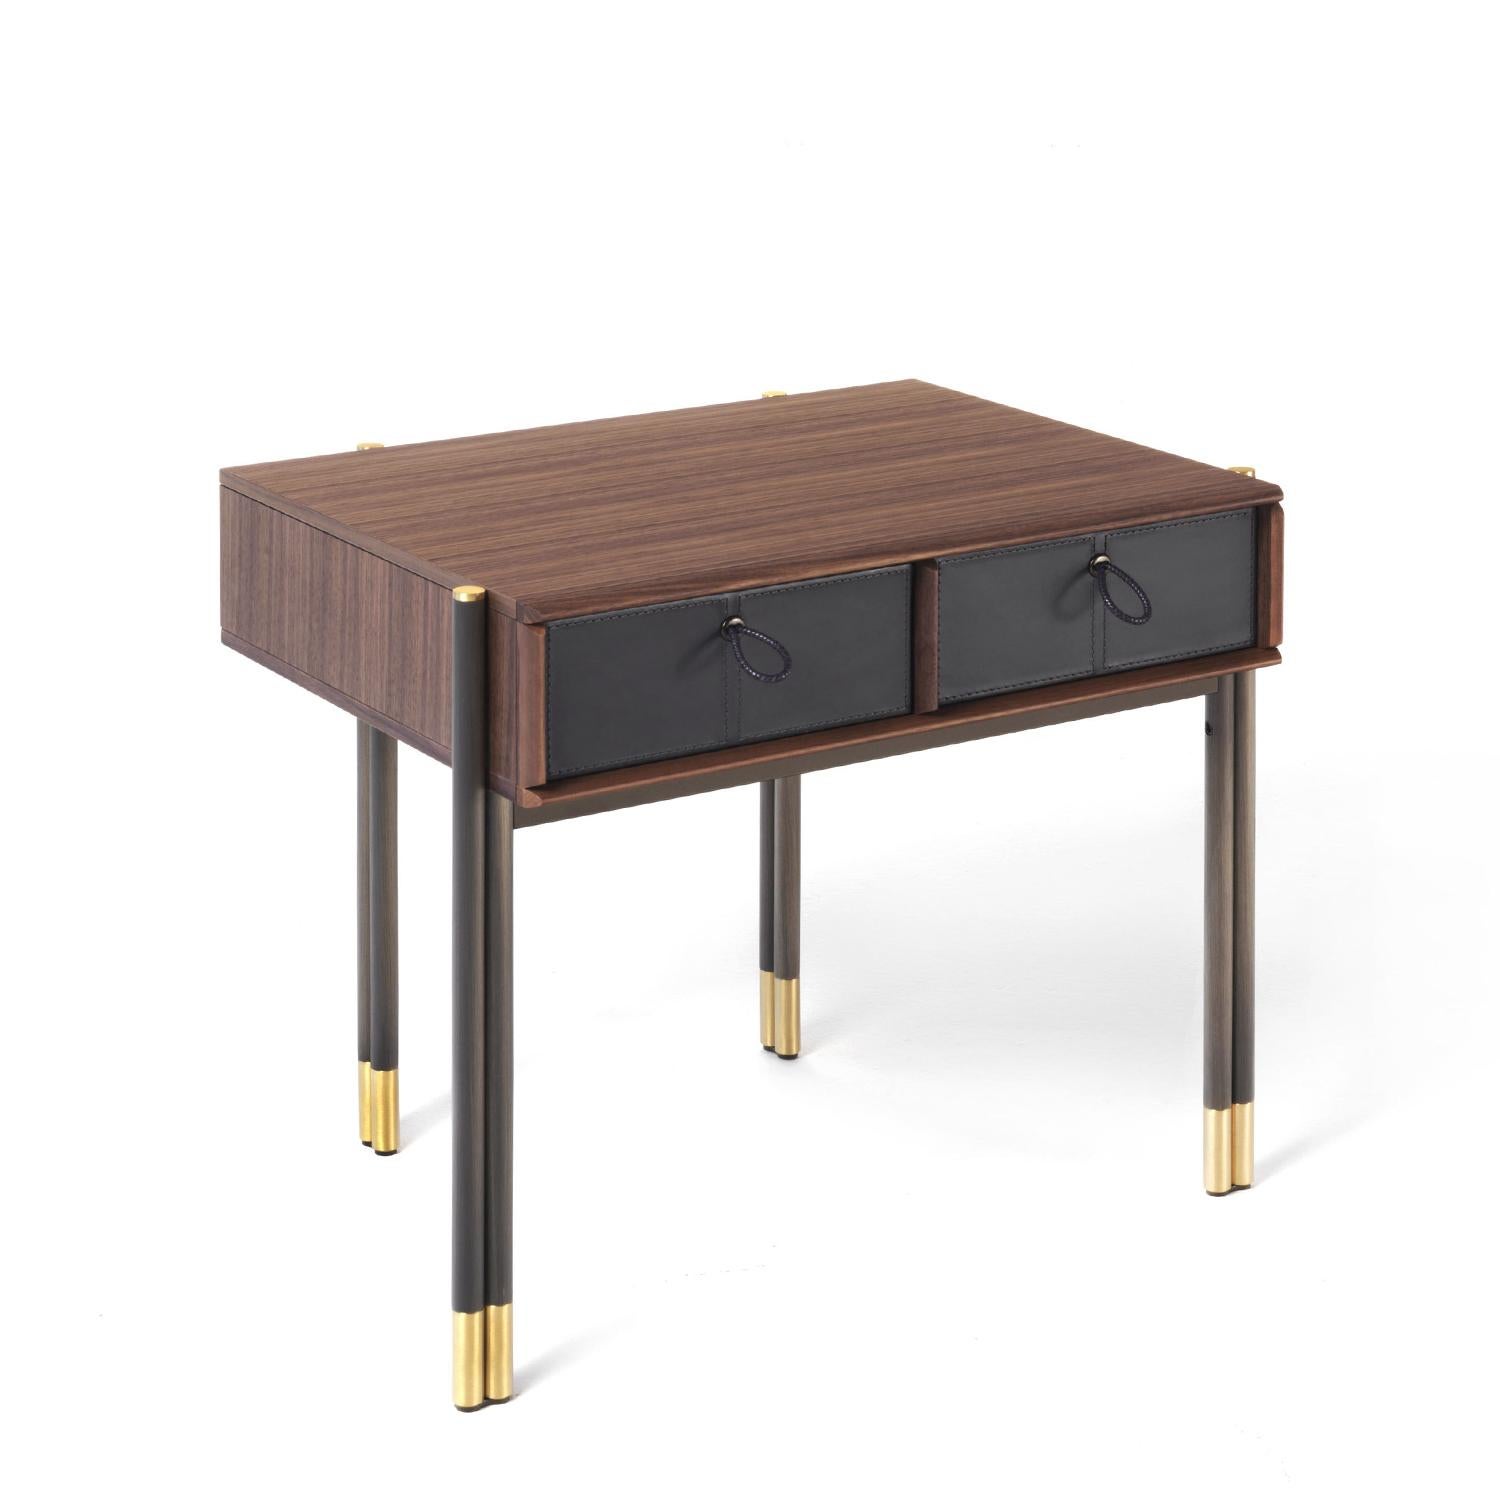 Side table Reda with top structure in solid walnut 
with 2 drawers in genuine leather in dark grey finish
with genuine braided leather handles in black finish.
With metal legs in bronzed metal with solid brass end-
feet in brushed finish.
Also